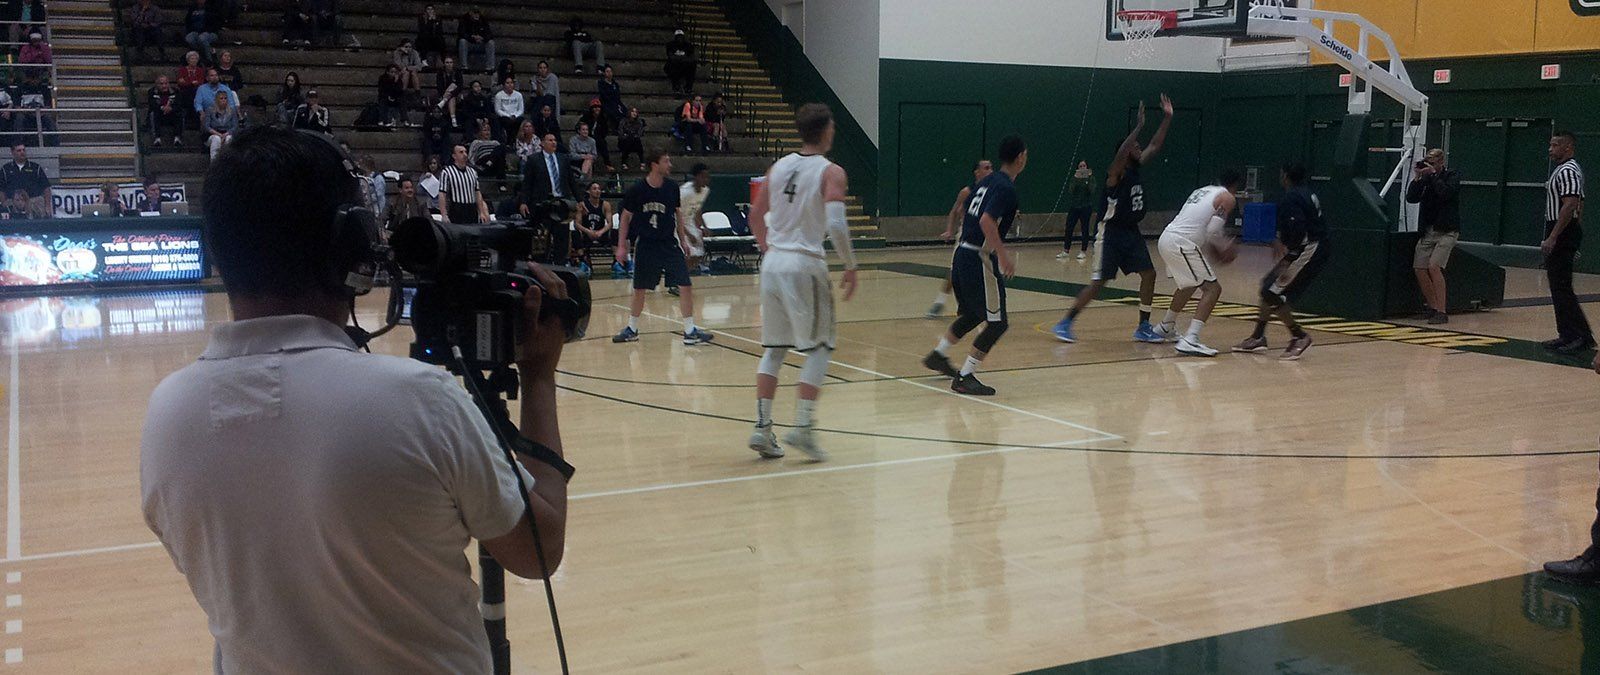 A student films a live broadcast of a men's basketball game.